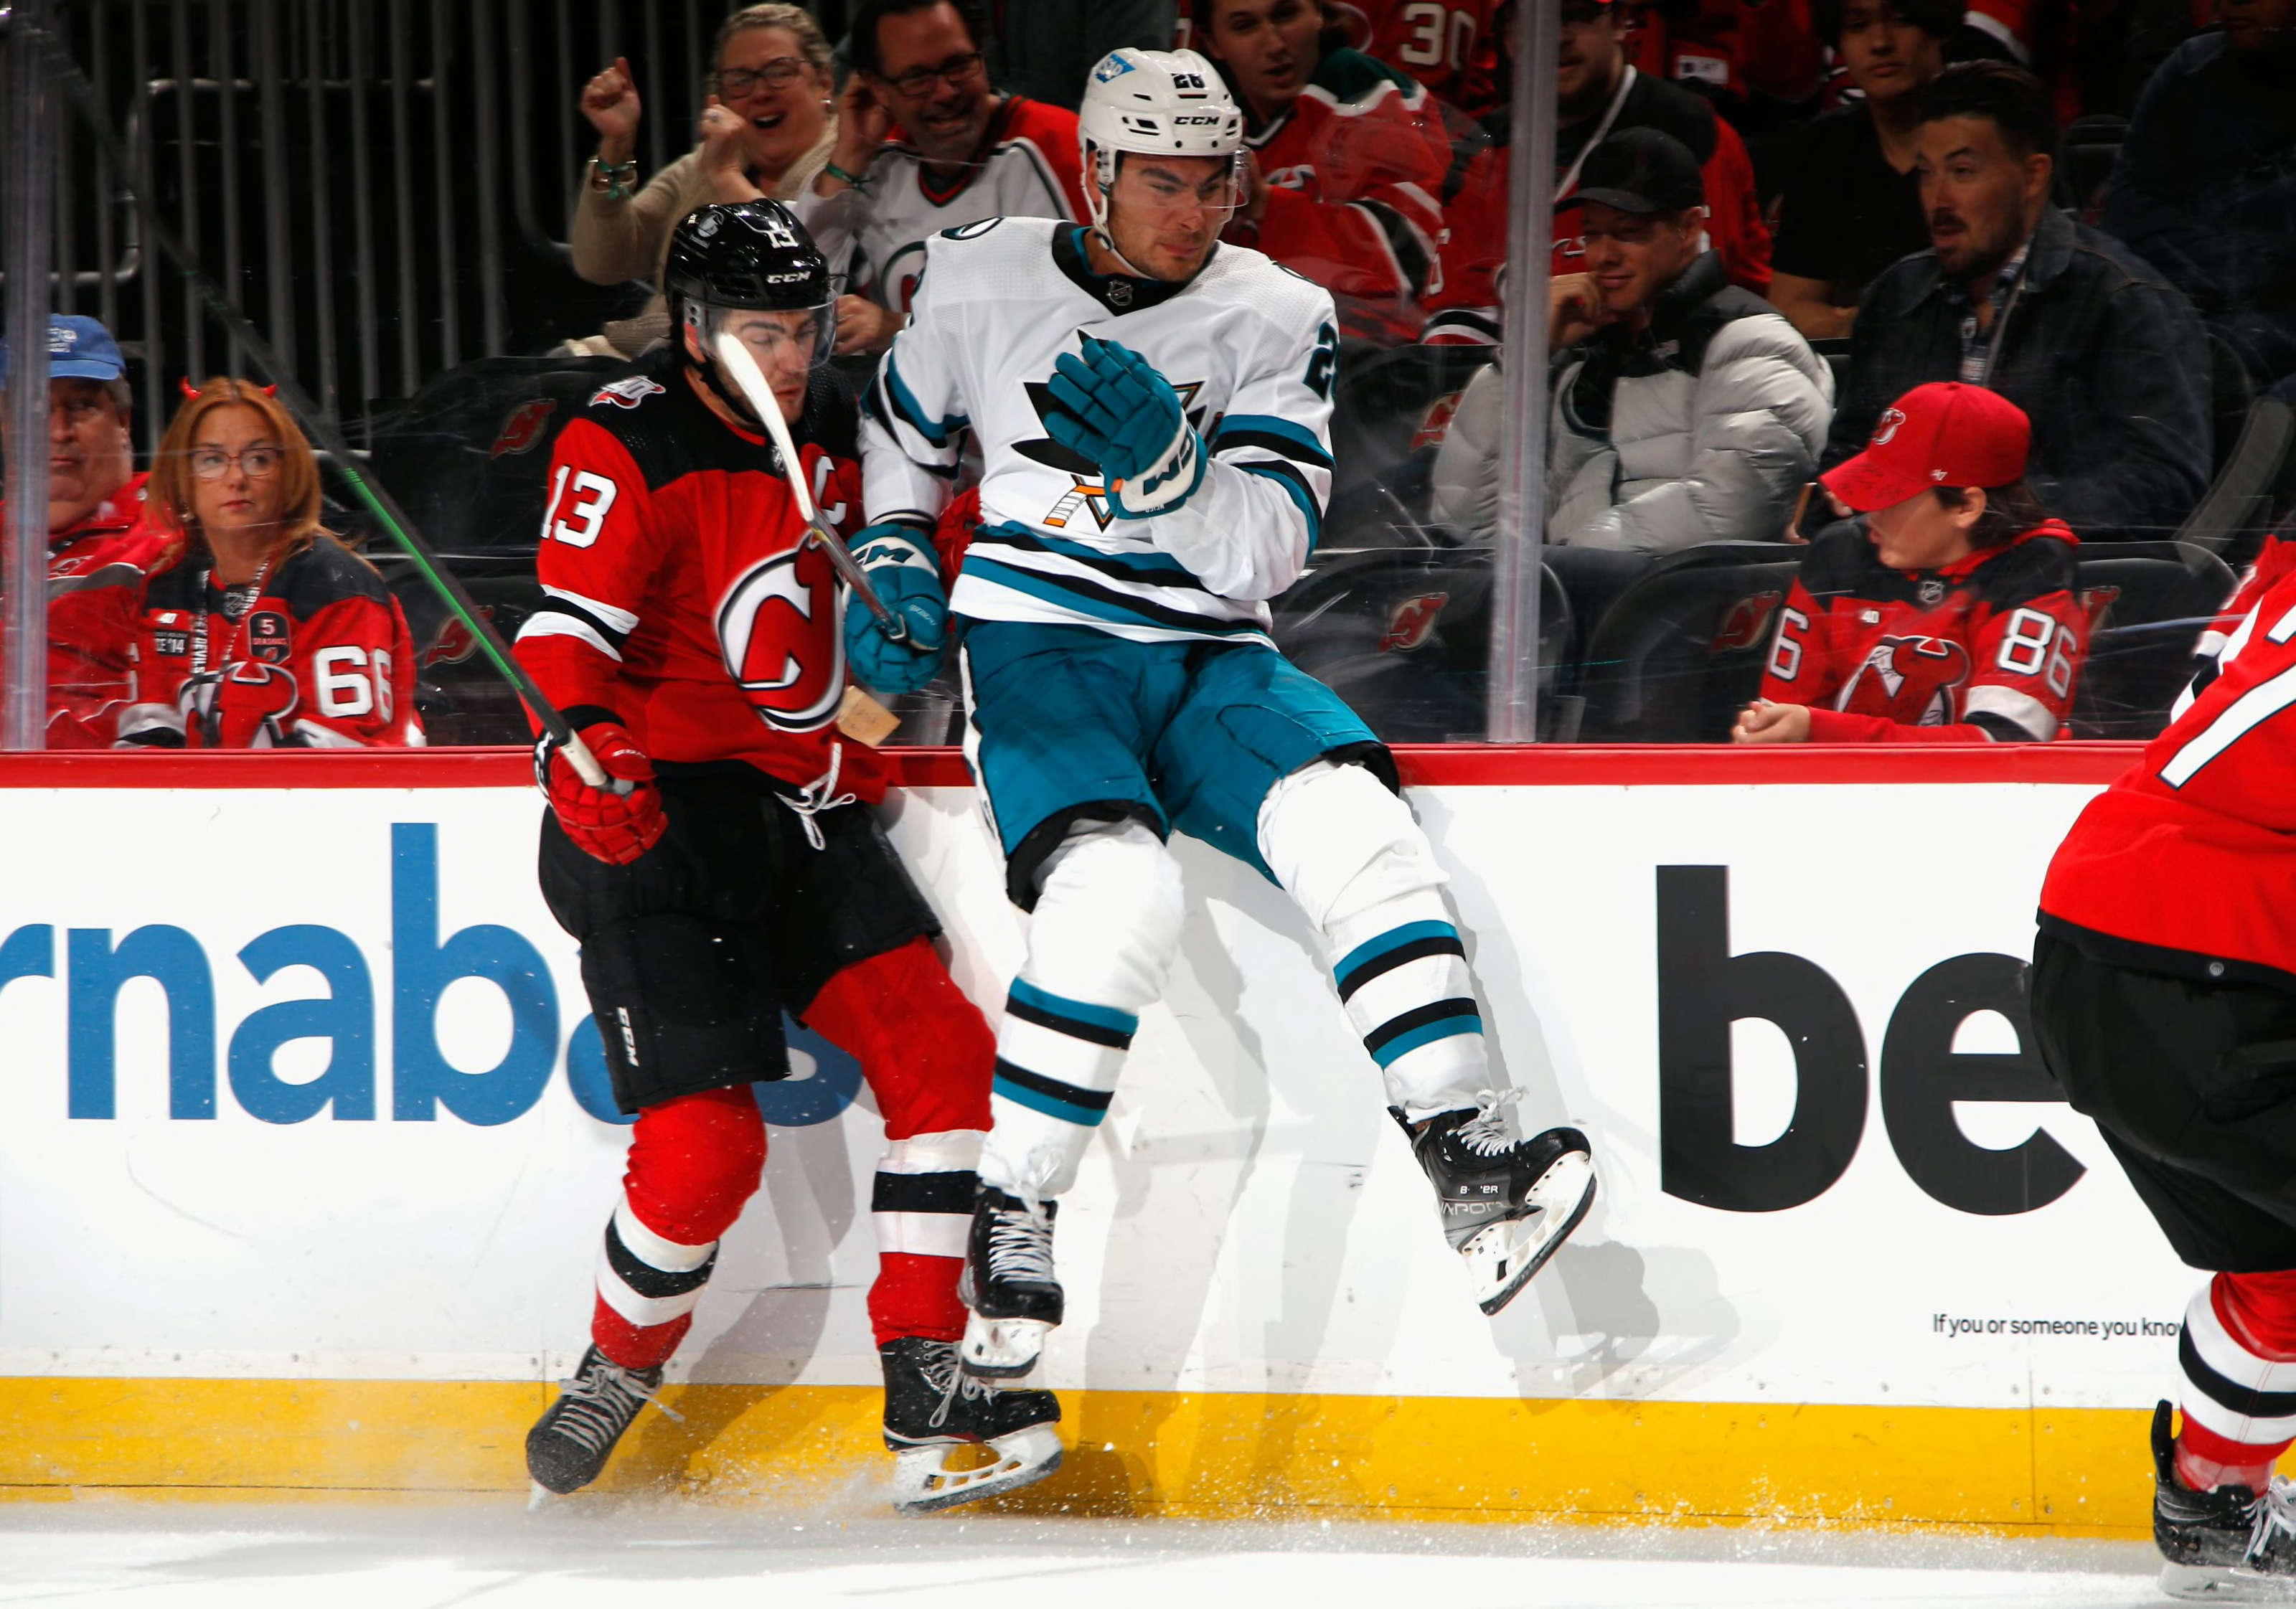 Devils Acquire Meier From the Sharks in a Massive Trade